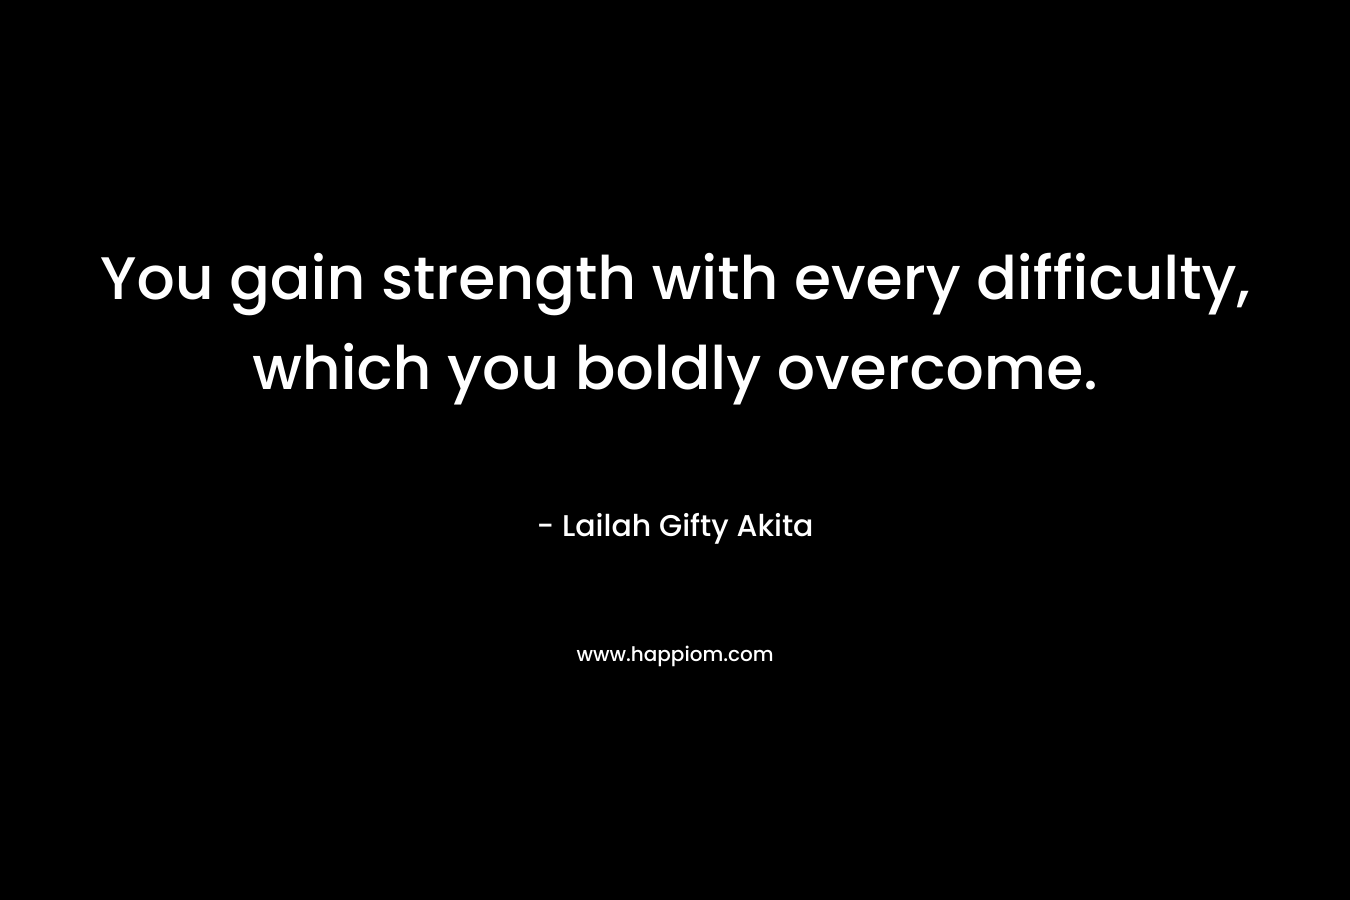 You gain strength with every difficulty, which you boldly overcome.